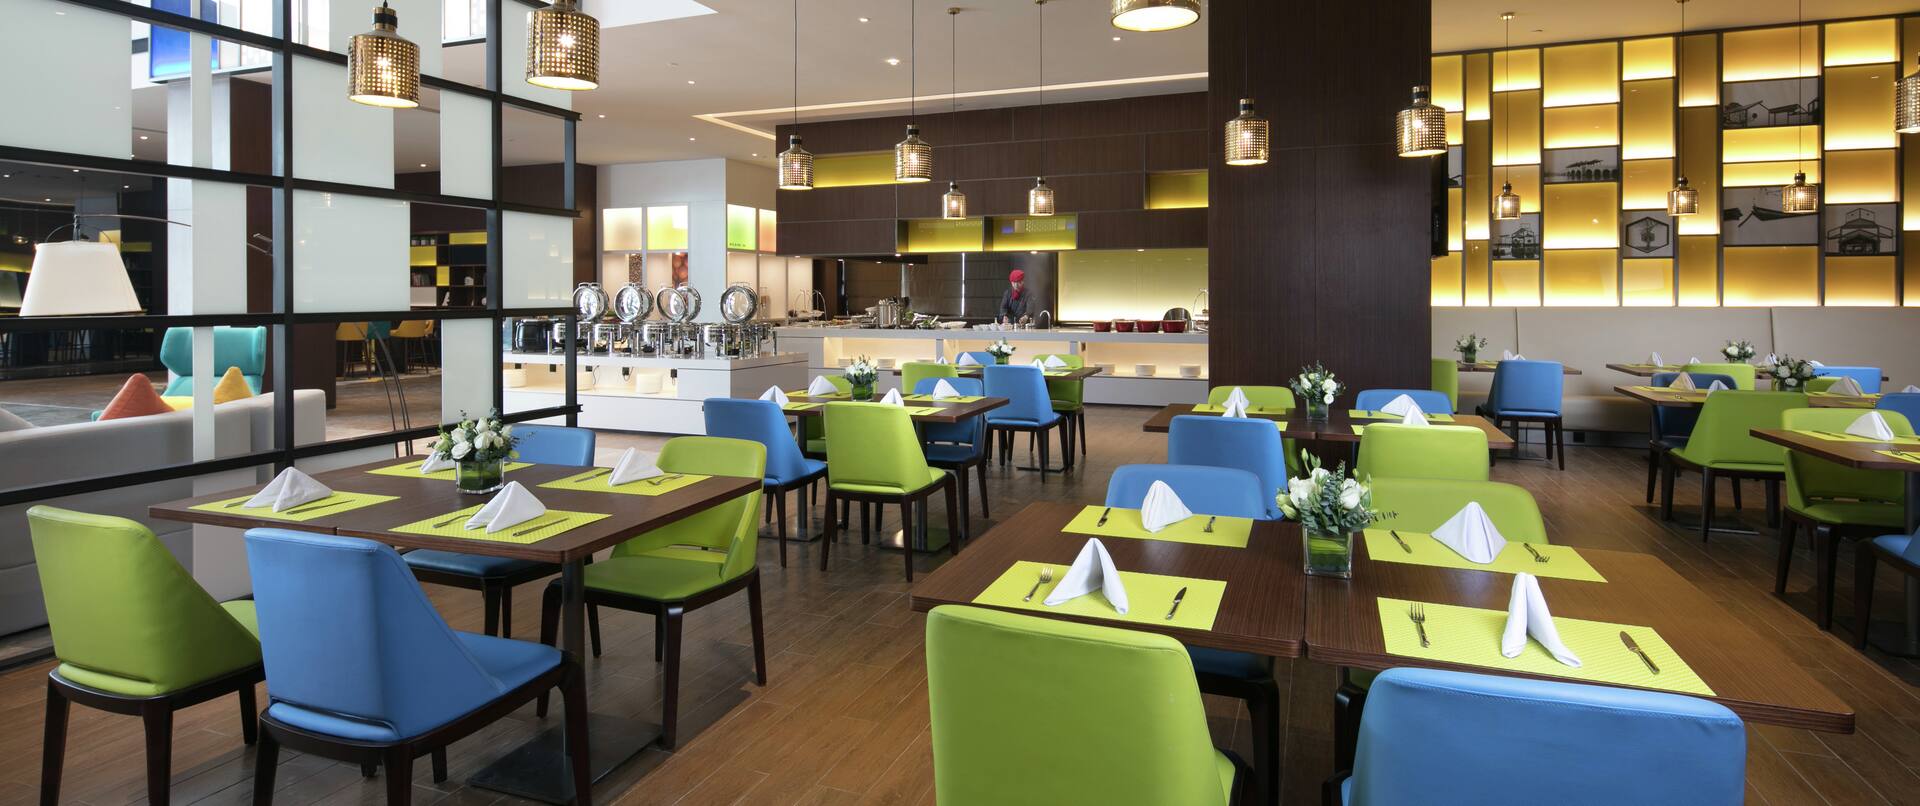 Dining Tables and Chairs in Restaurant